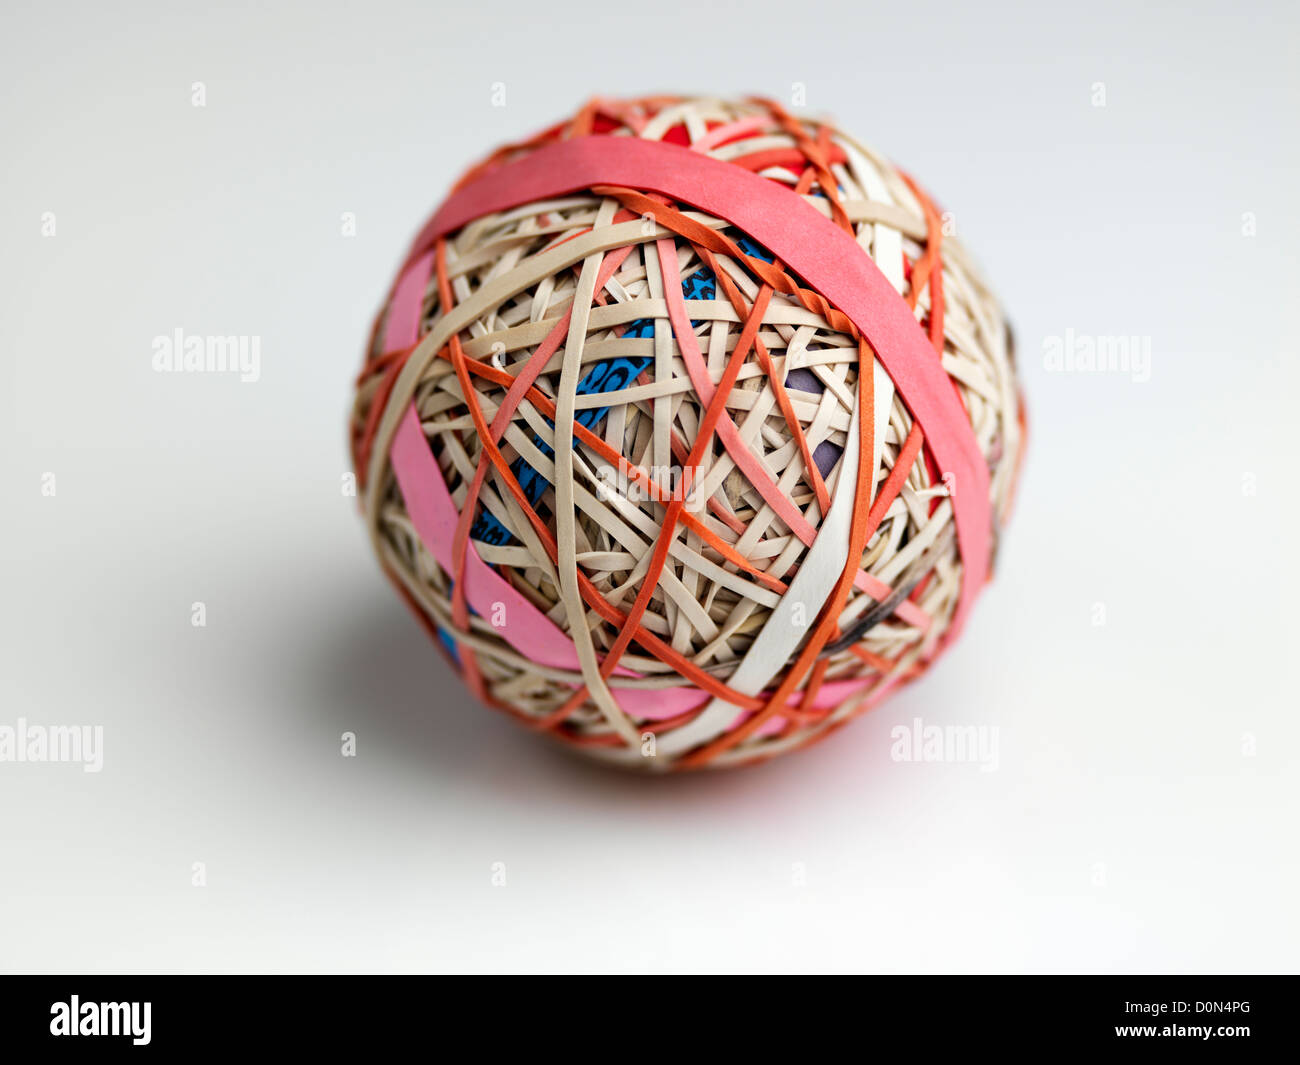 rubber band ball, ball made up of rubber bands wound over each other Stock Photo